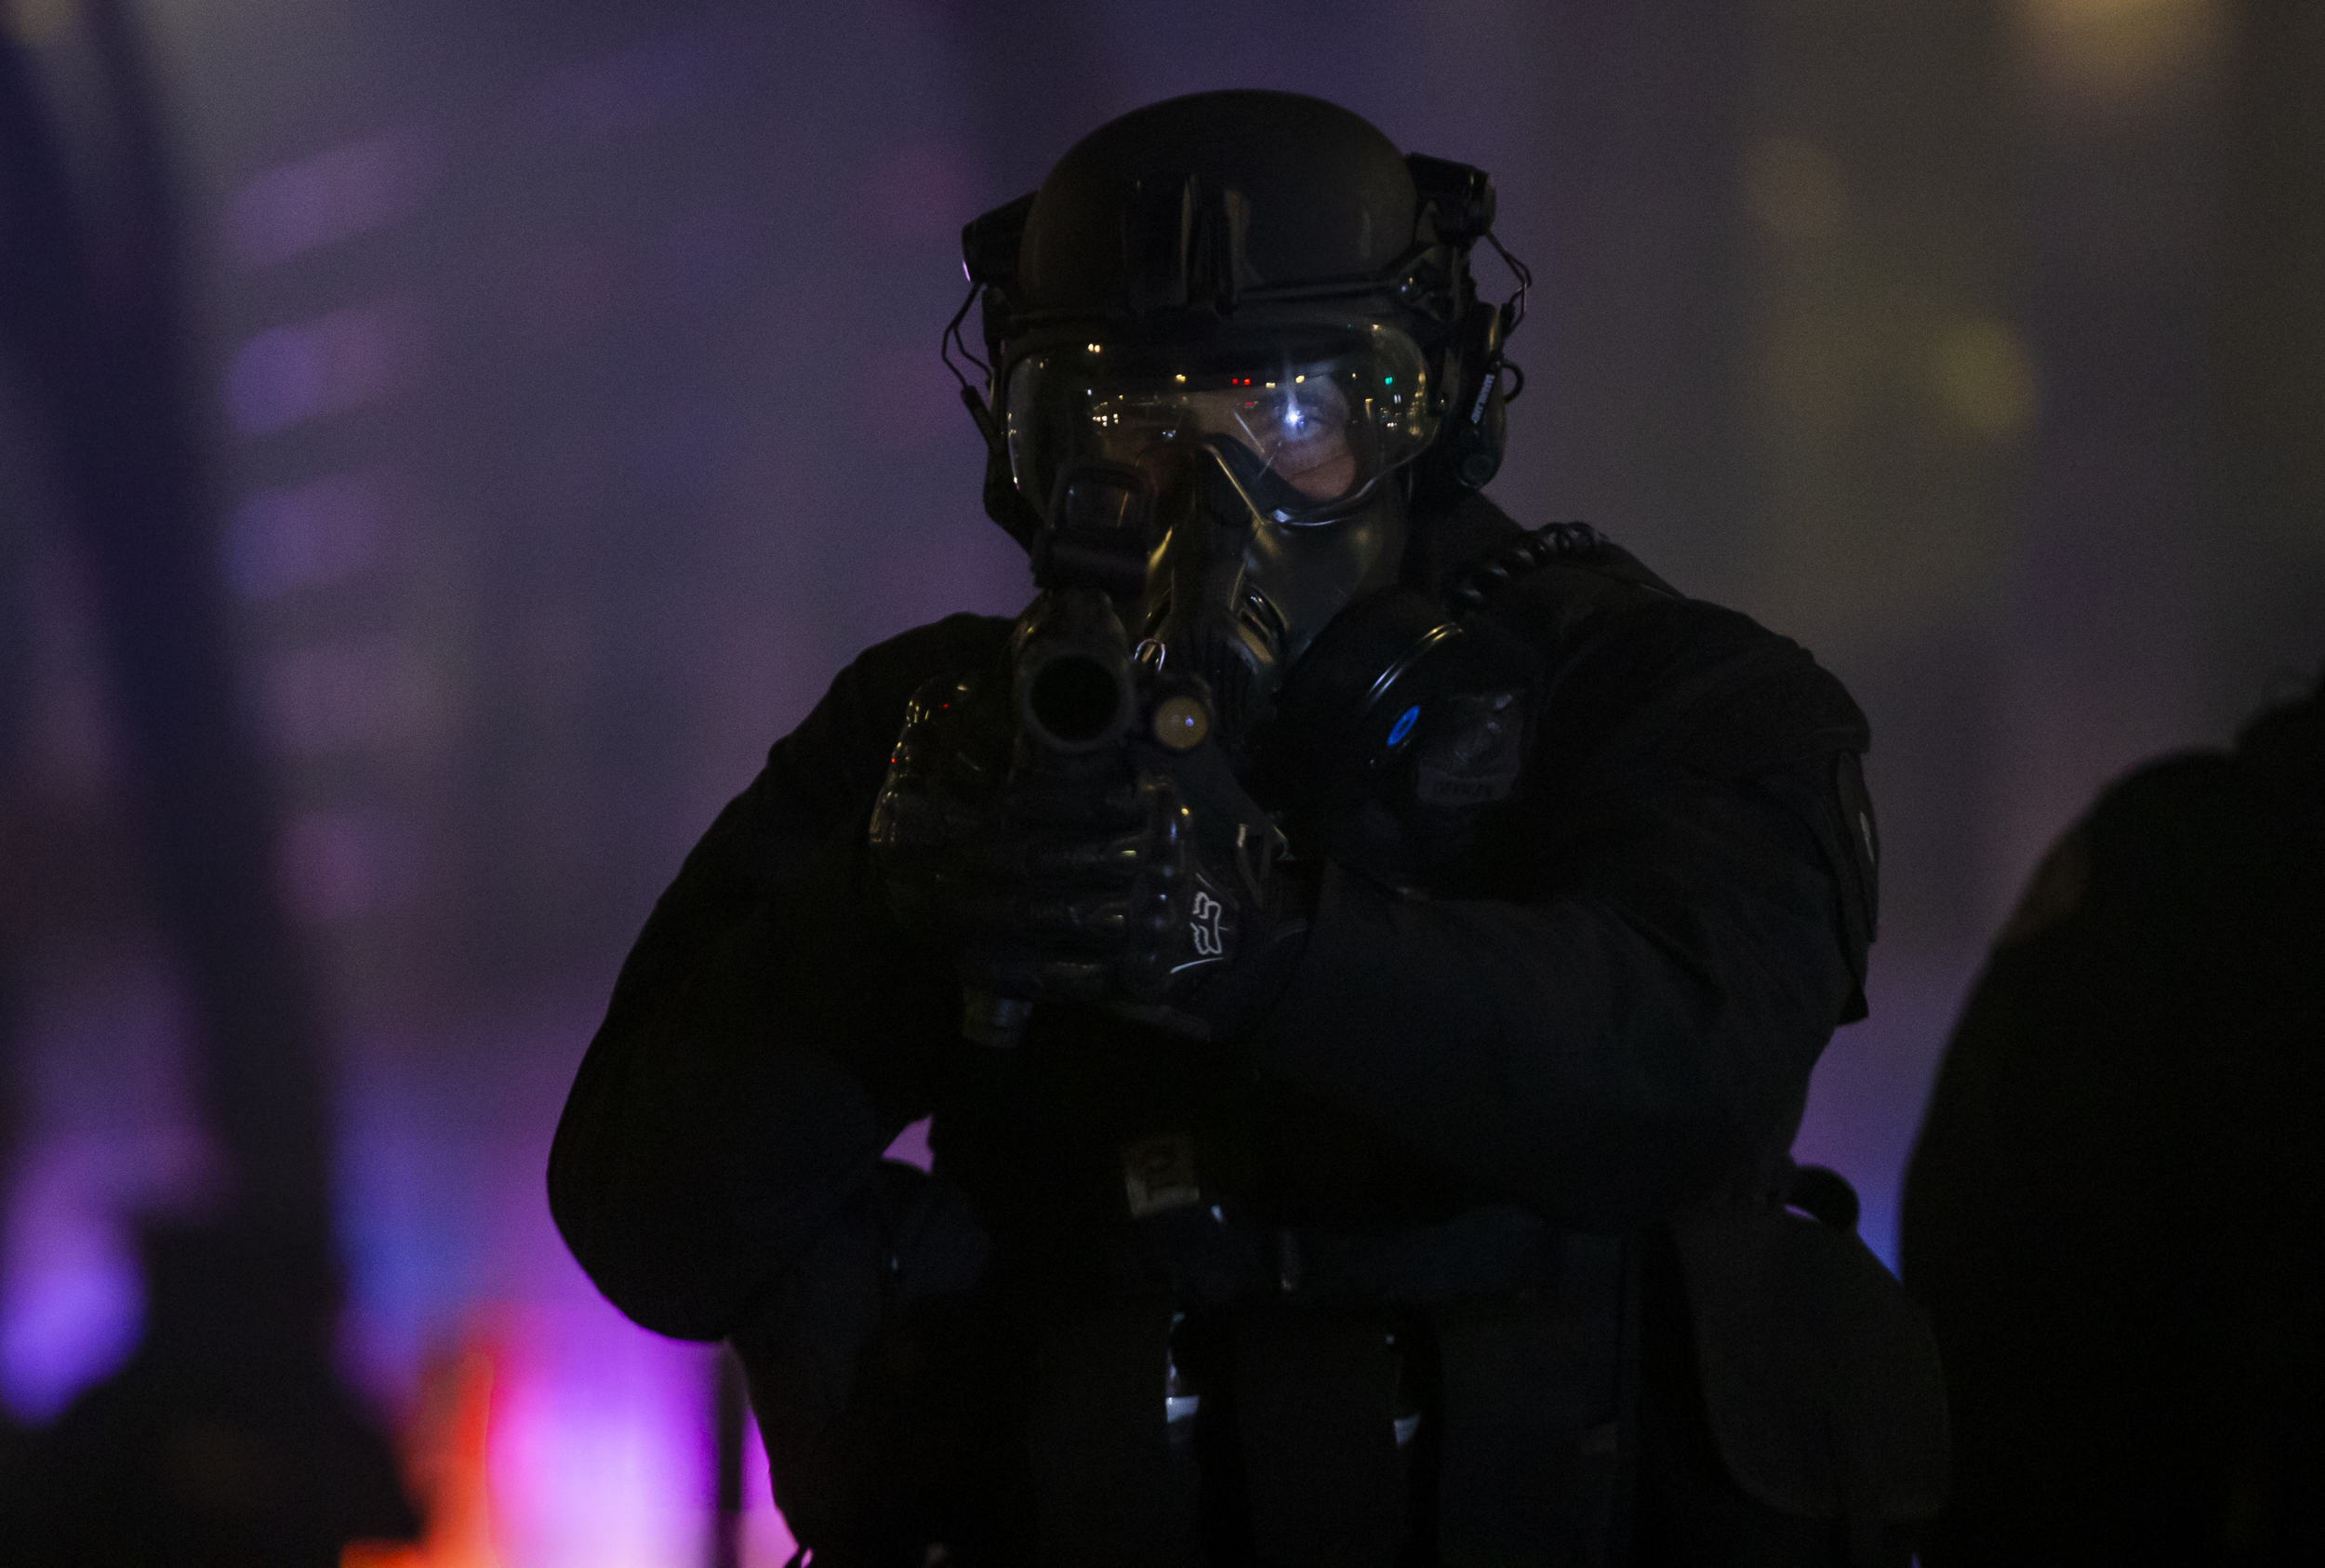 A police officer aims a weapon while dispersing the crowd after protesters took to the streets of Portland, Ore., for the 11th consecutive day of demonstrations on Sunday, June 7, 2020. The calls for change started after the May 25 death of George Floyd.  Dave Killen/Staff